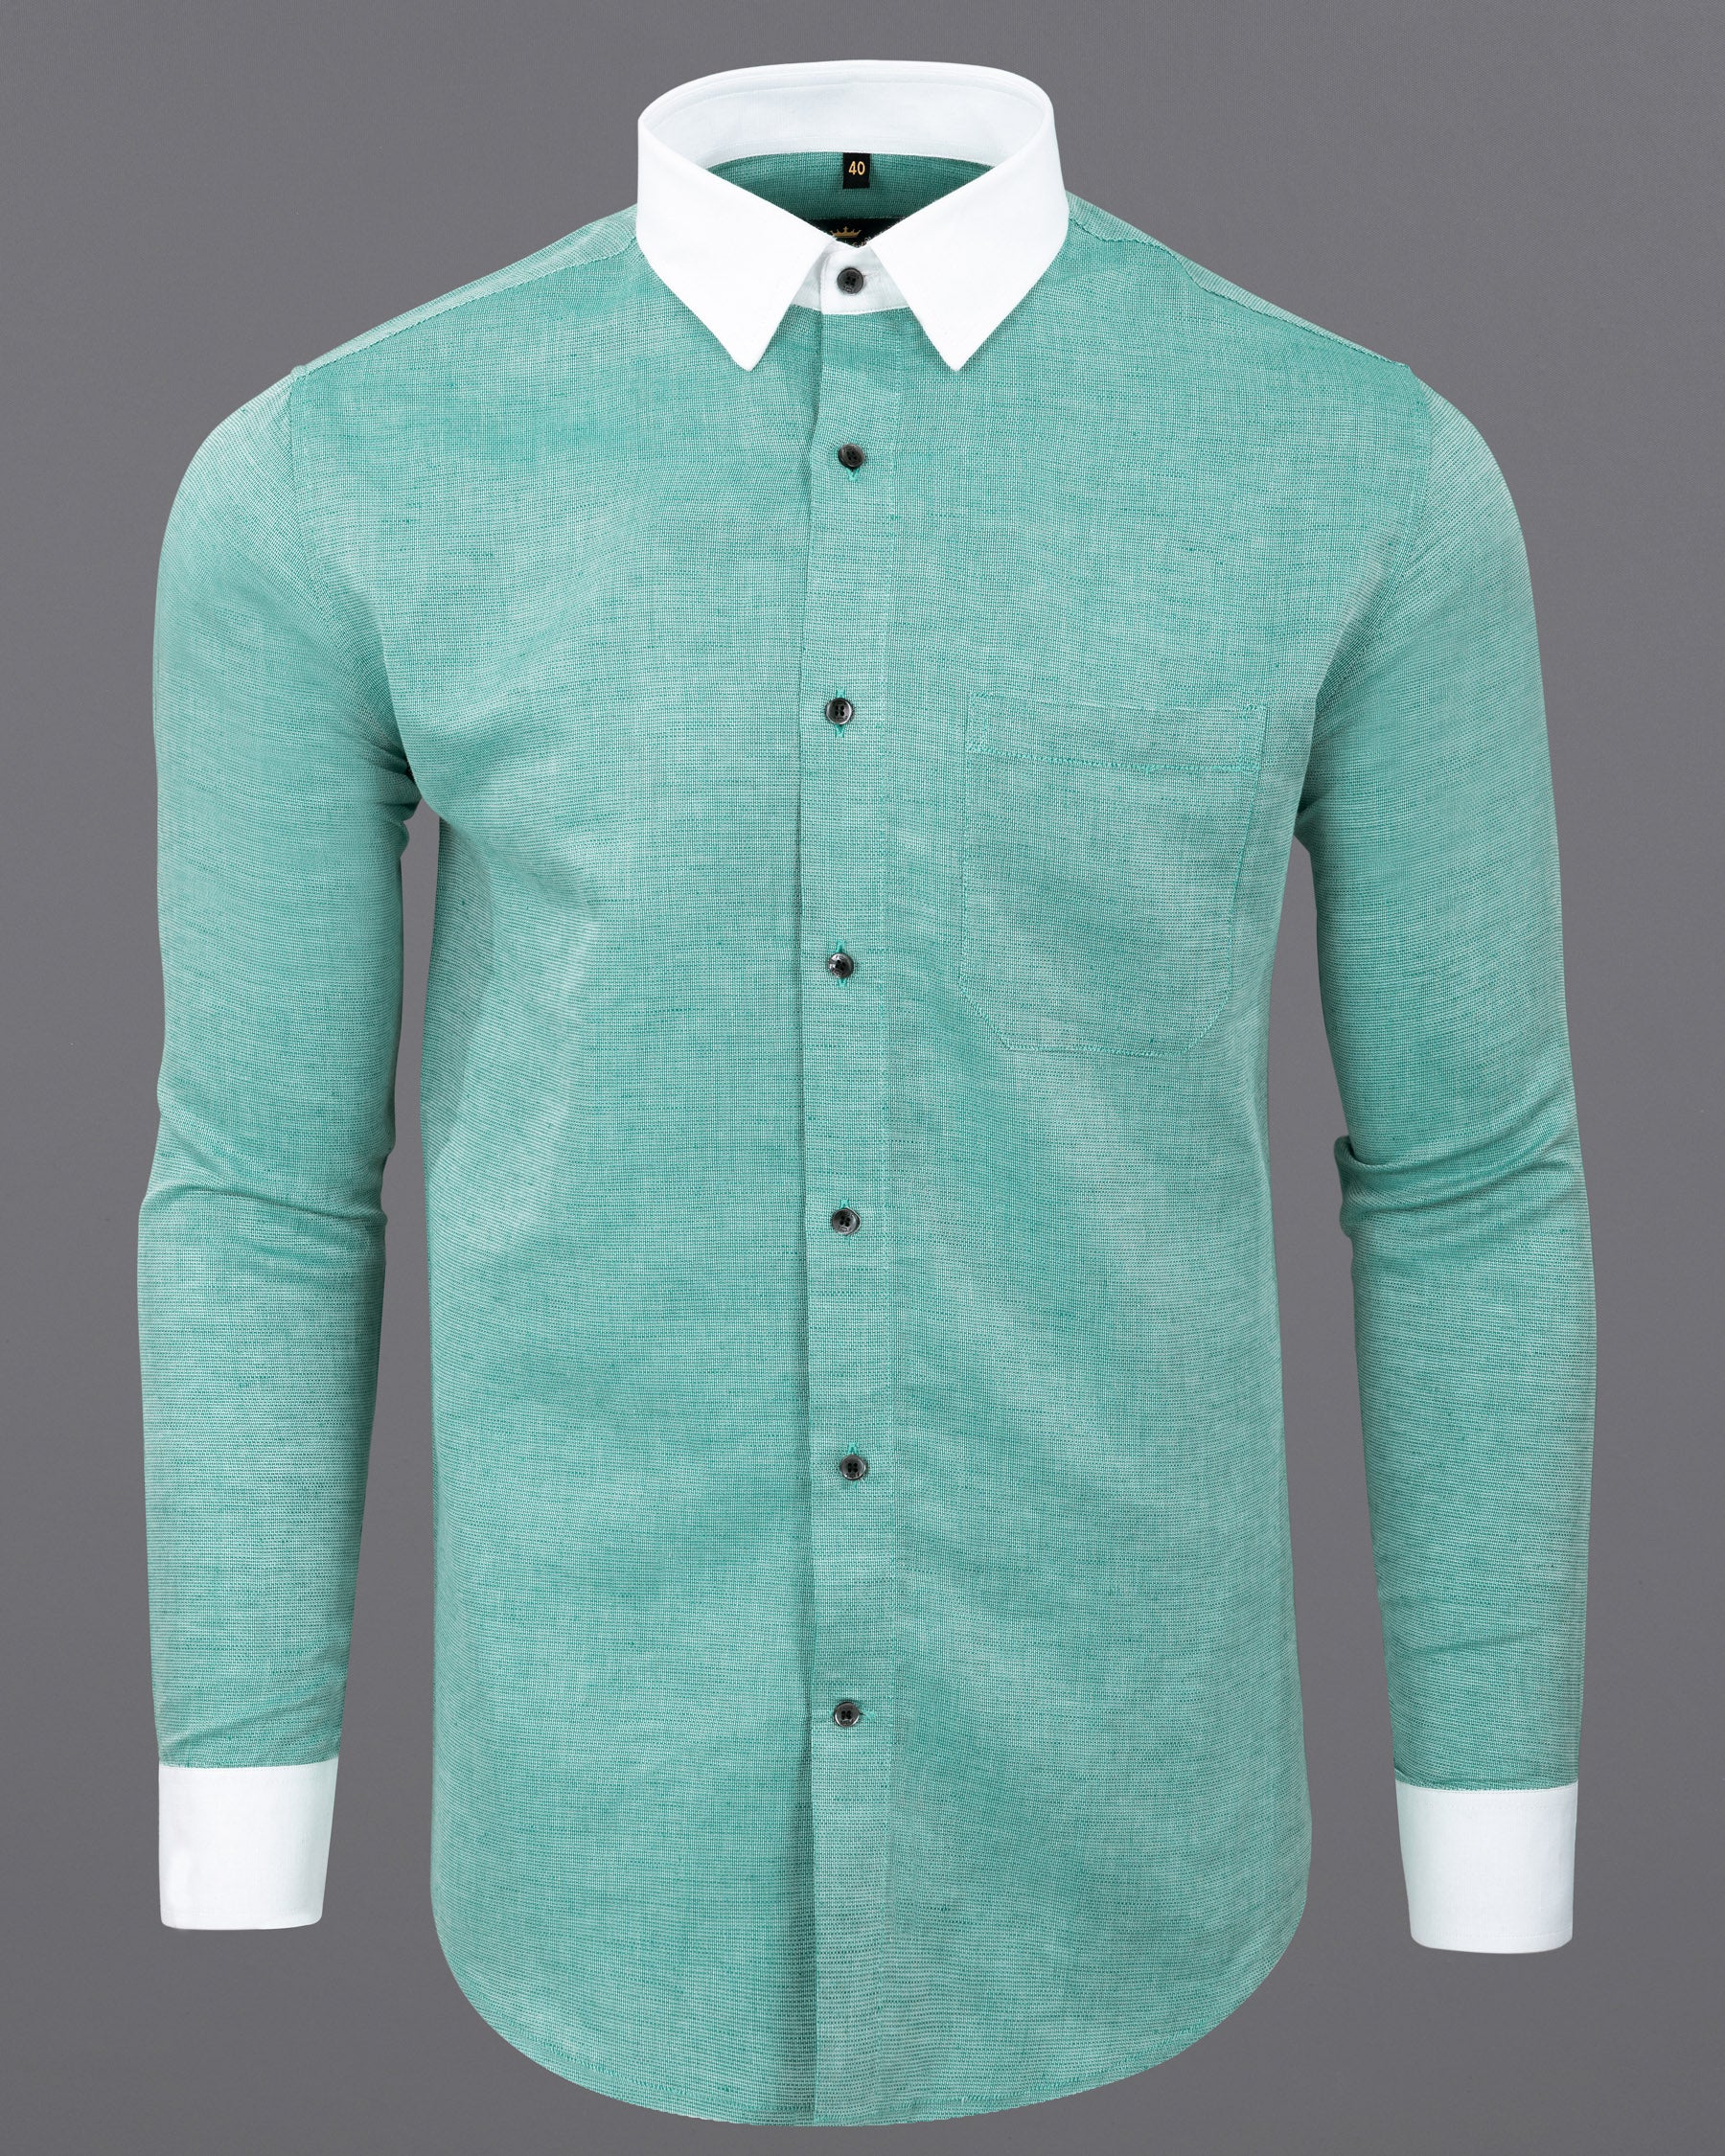 Acapulco Green with White Collar Luxurious Linen Shirt 5733-WCC-BLK-38, 5733-WCC-BLK-H-38, 5733-WCC-BLK-39, 5733-WCC-BLK-H-39, 5733-WCC-BLK-40, 5733-WCC-BLK-H-40, 5733-WCC-BLK-42, 5733-WCC-BLK-H-42, 5733-WCC-BLK-44, 5733-WCC-BLK-H-44, 5733-WCC-BLK-46, 5733-WCC-BLK-H-46, 5733-WCC-BLK-48, 5733-WCC-BLK-H-48, 5733-WCC-BLK-50, 5733-WCC-BLK-H-50, 5733-WCC-BLK-52, 5733-WCC-BLK-H-52